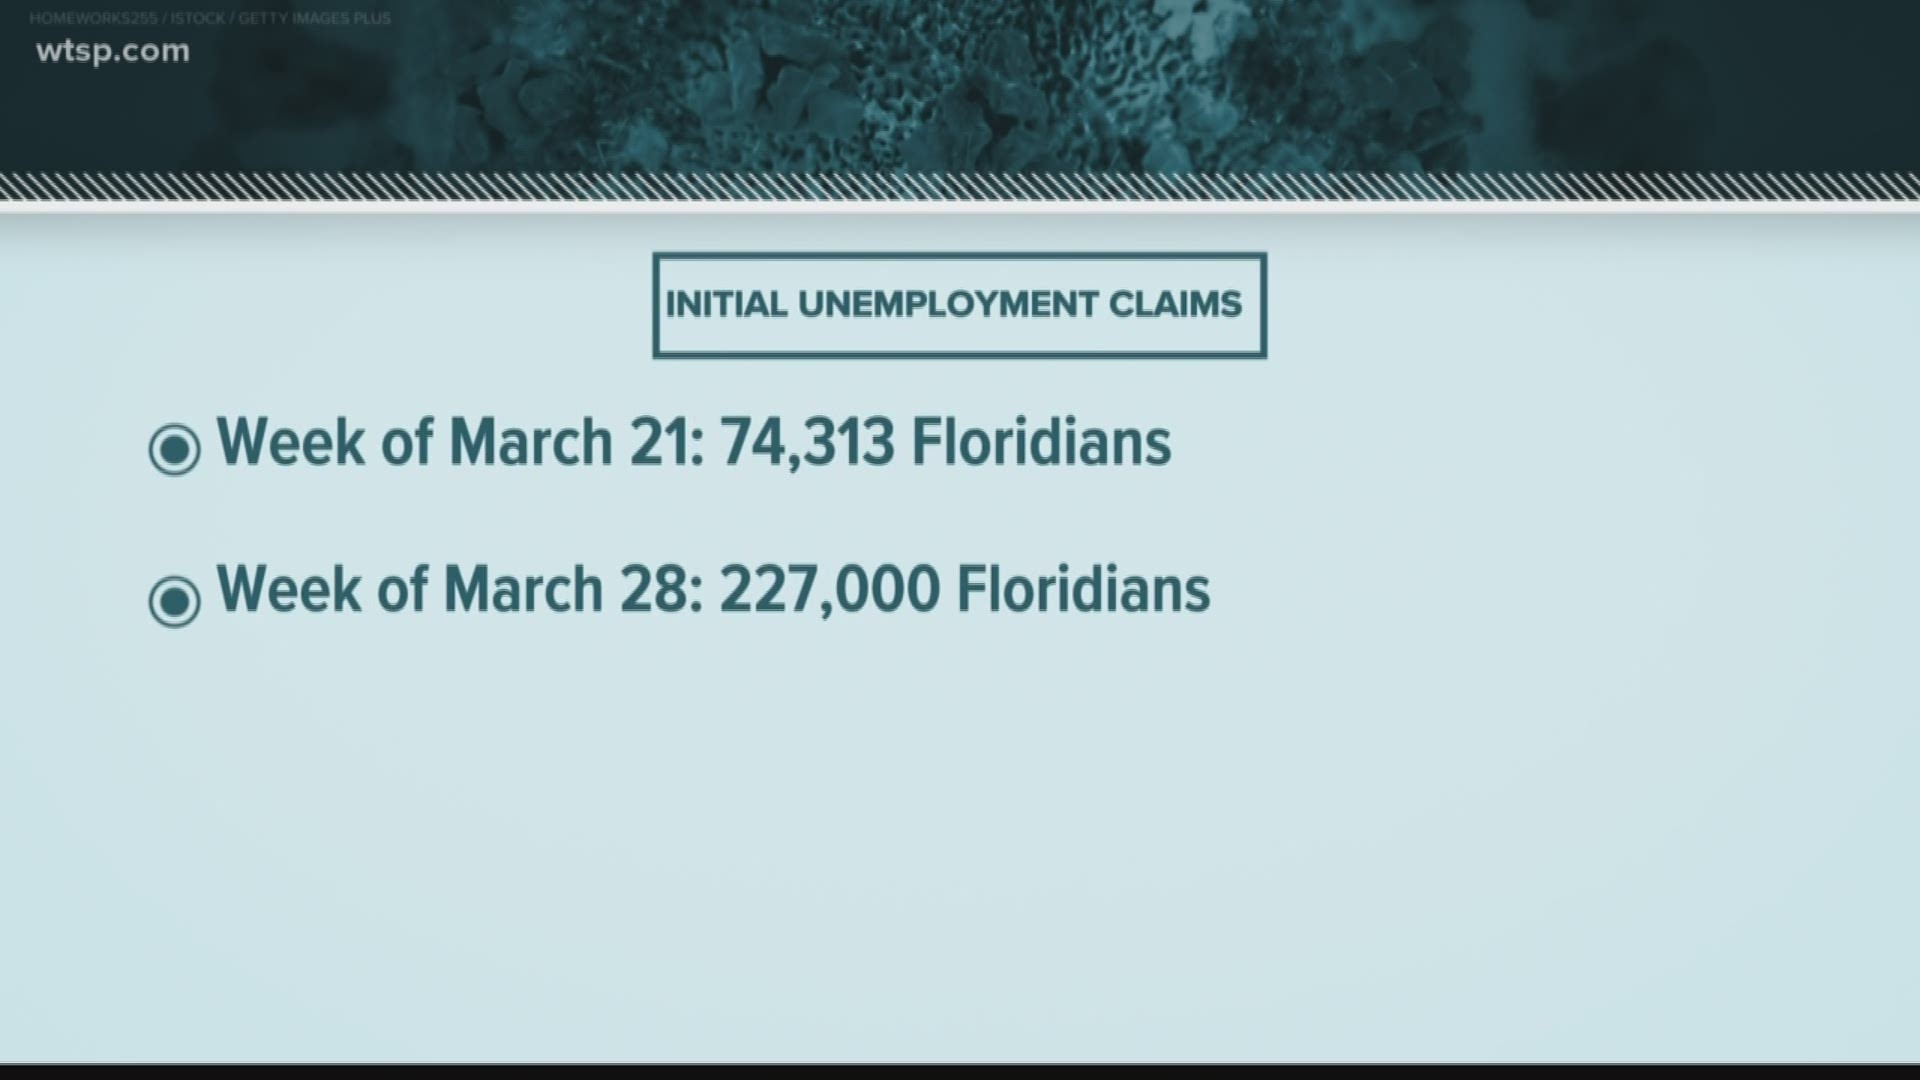 DeSantis said he wants out of work Floridians to get an answer when they call about unemployment.